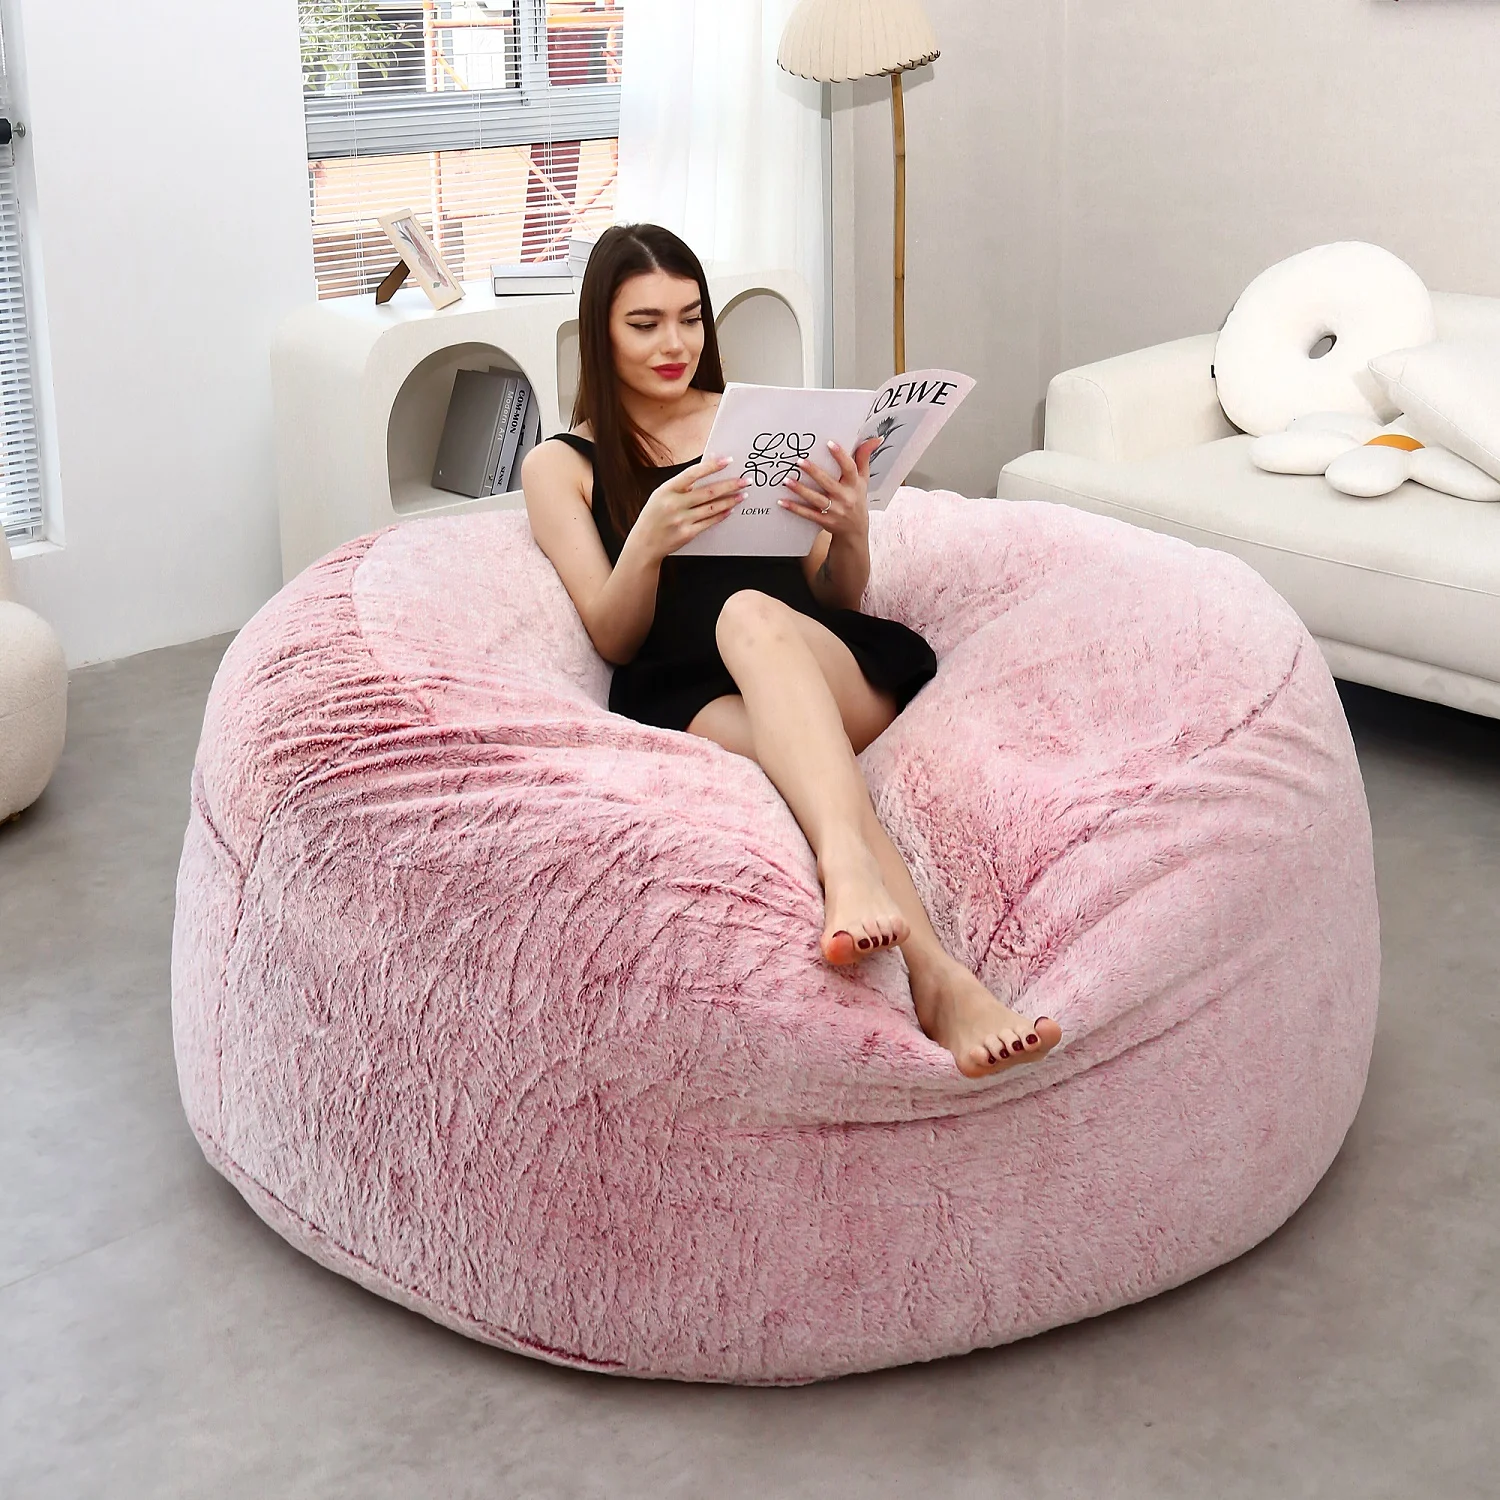 Dropshipping gaint 7ft Adults Bean Bag Chair Floor Corner Seat Comfy Velvet  Lazy Sofa Pouf Game Couch no Filling Beanbag - AliExpress